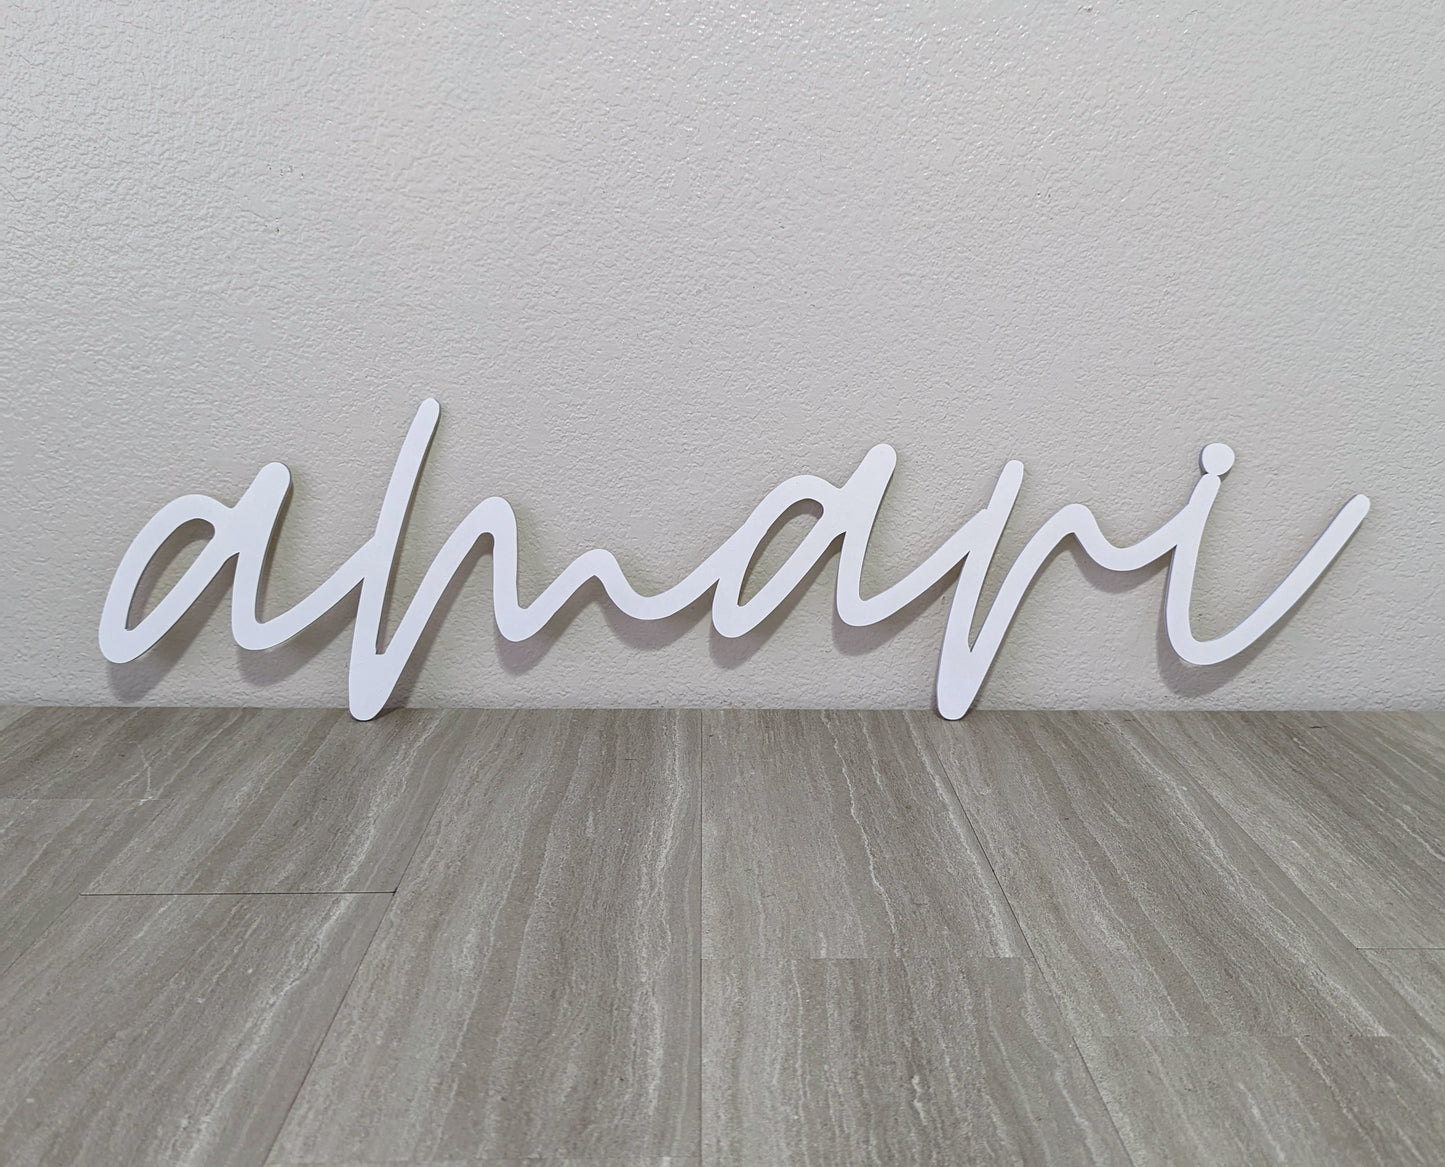 Custom Cut Out Words & Letters